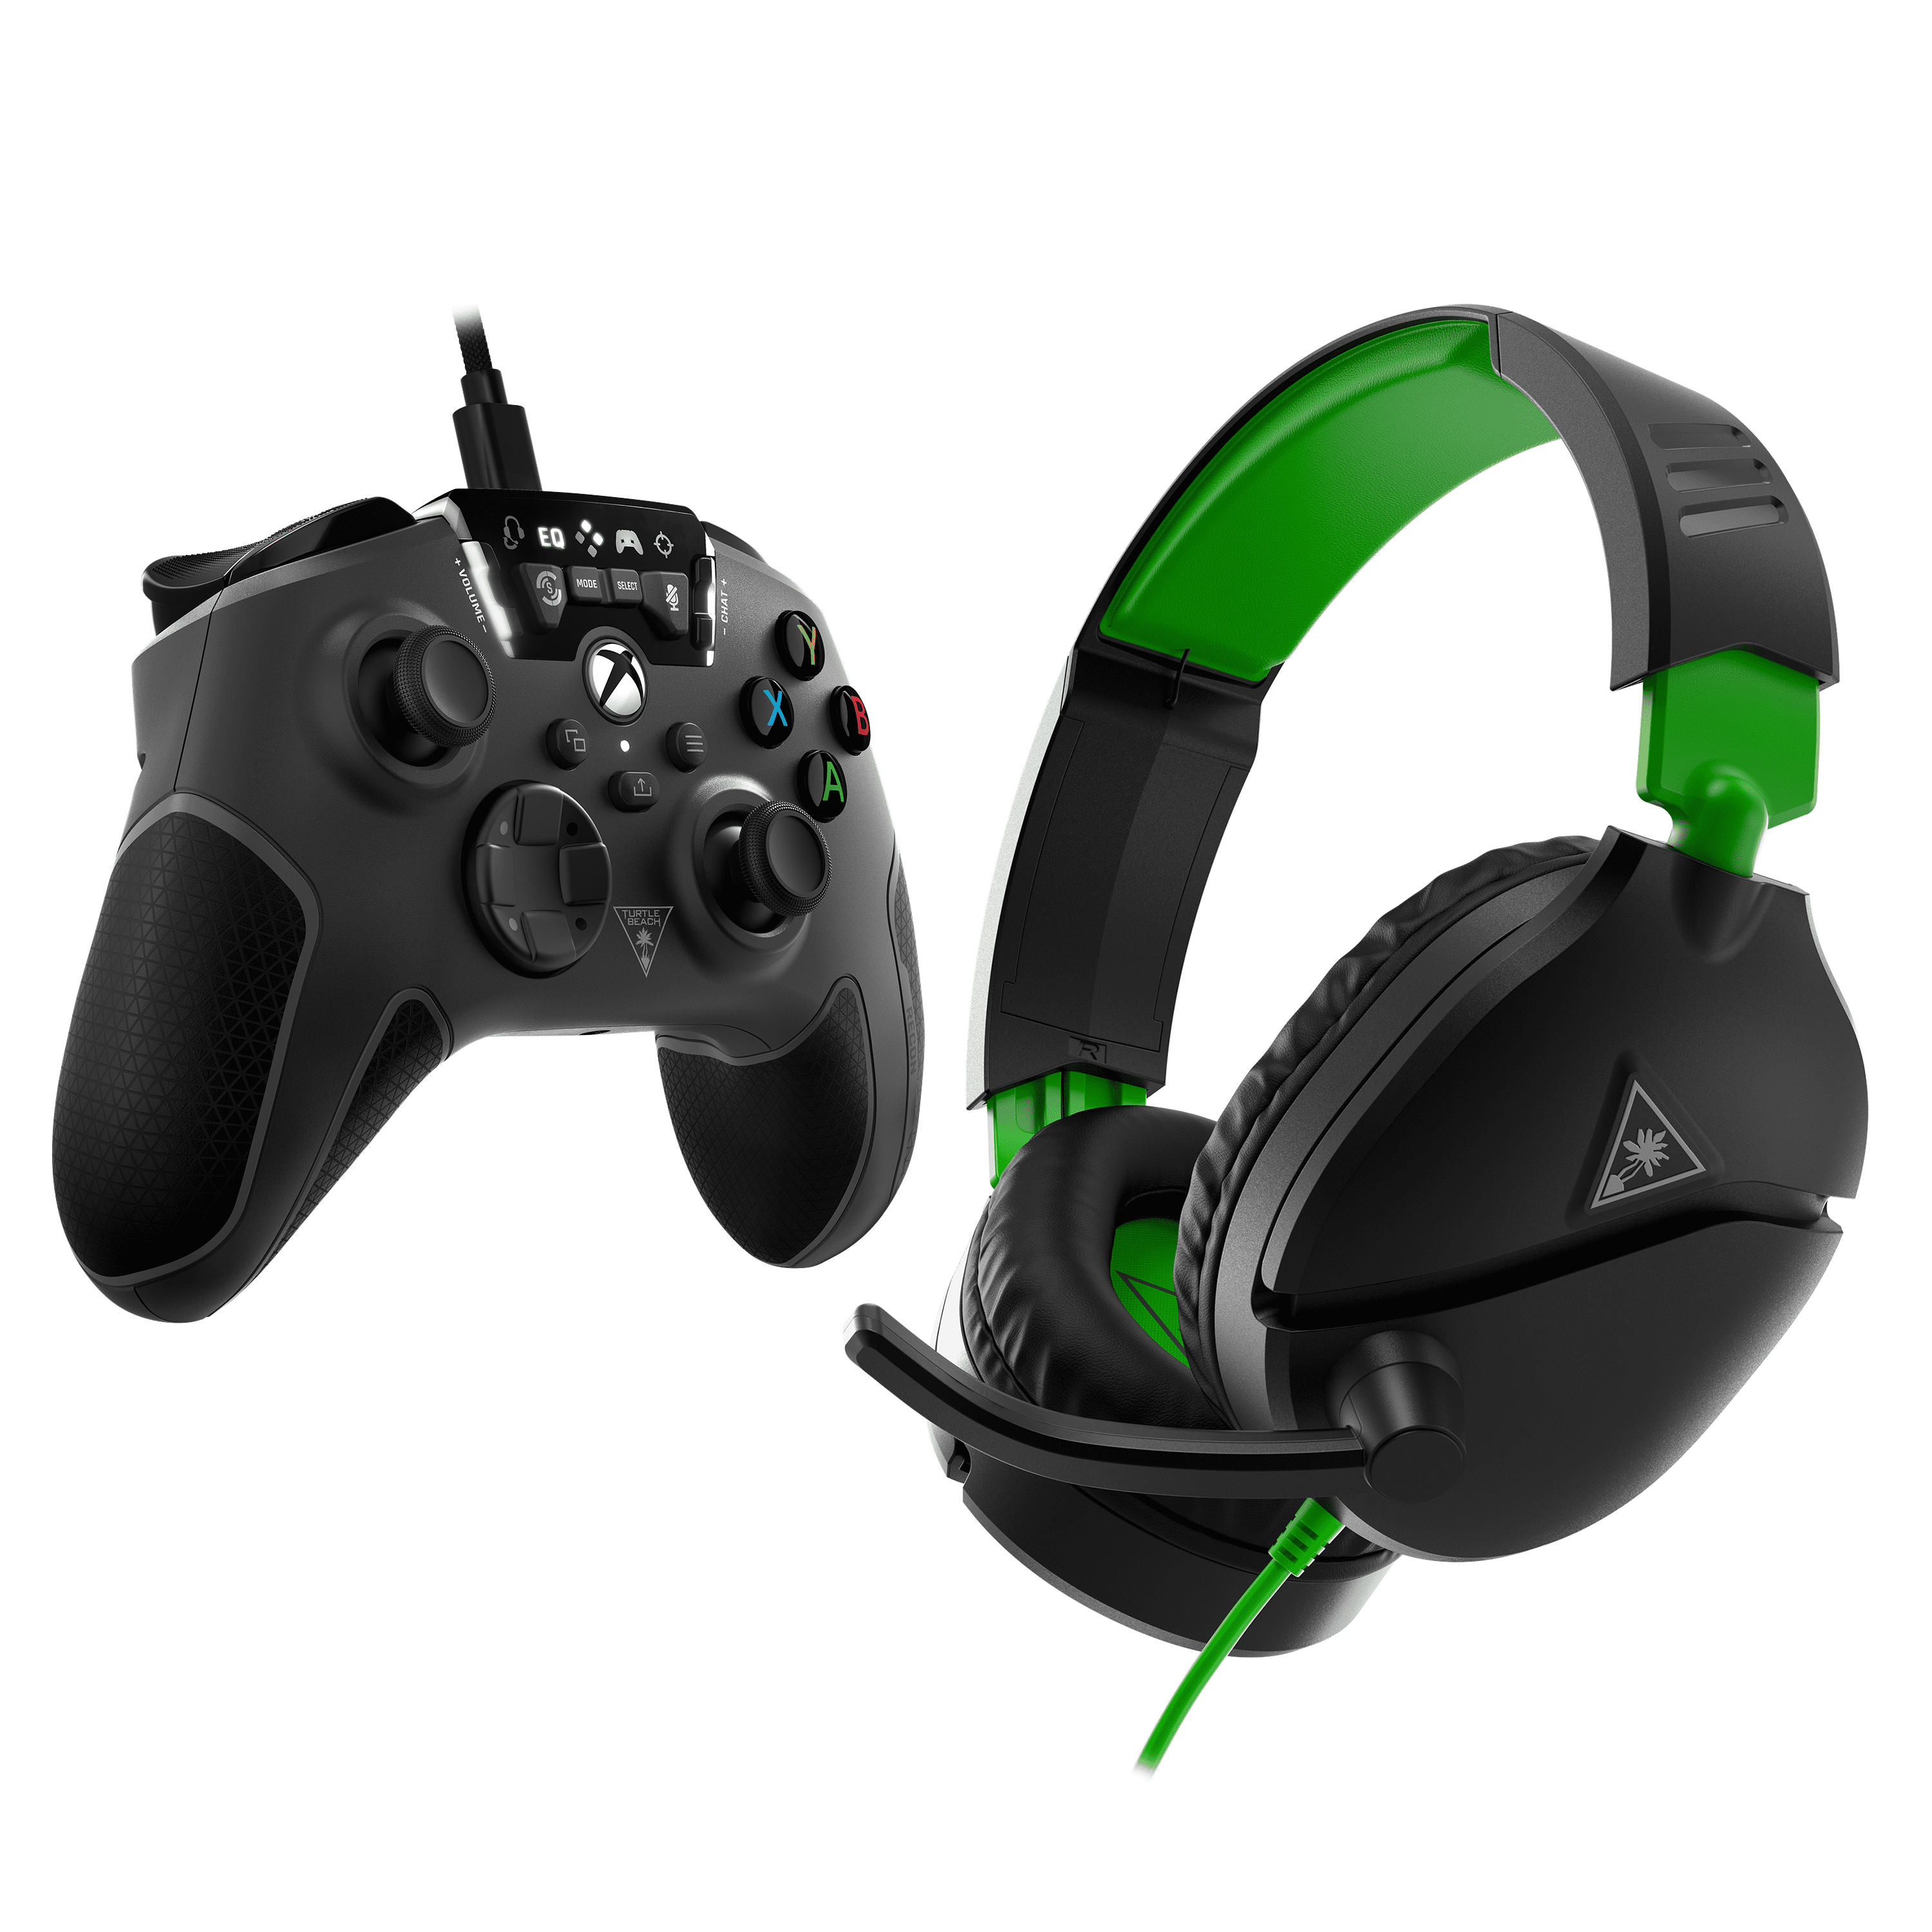 Turtle Beach Xbox Gamers Pack Featuring Recon 70 Gaming Headset  Recon  Controller with Audio Enhancements – Licensed for Xbox Series X, Xbox  Series S, Xbox One  Windows – Black